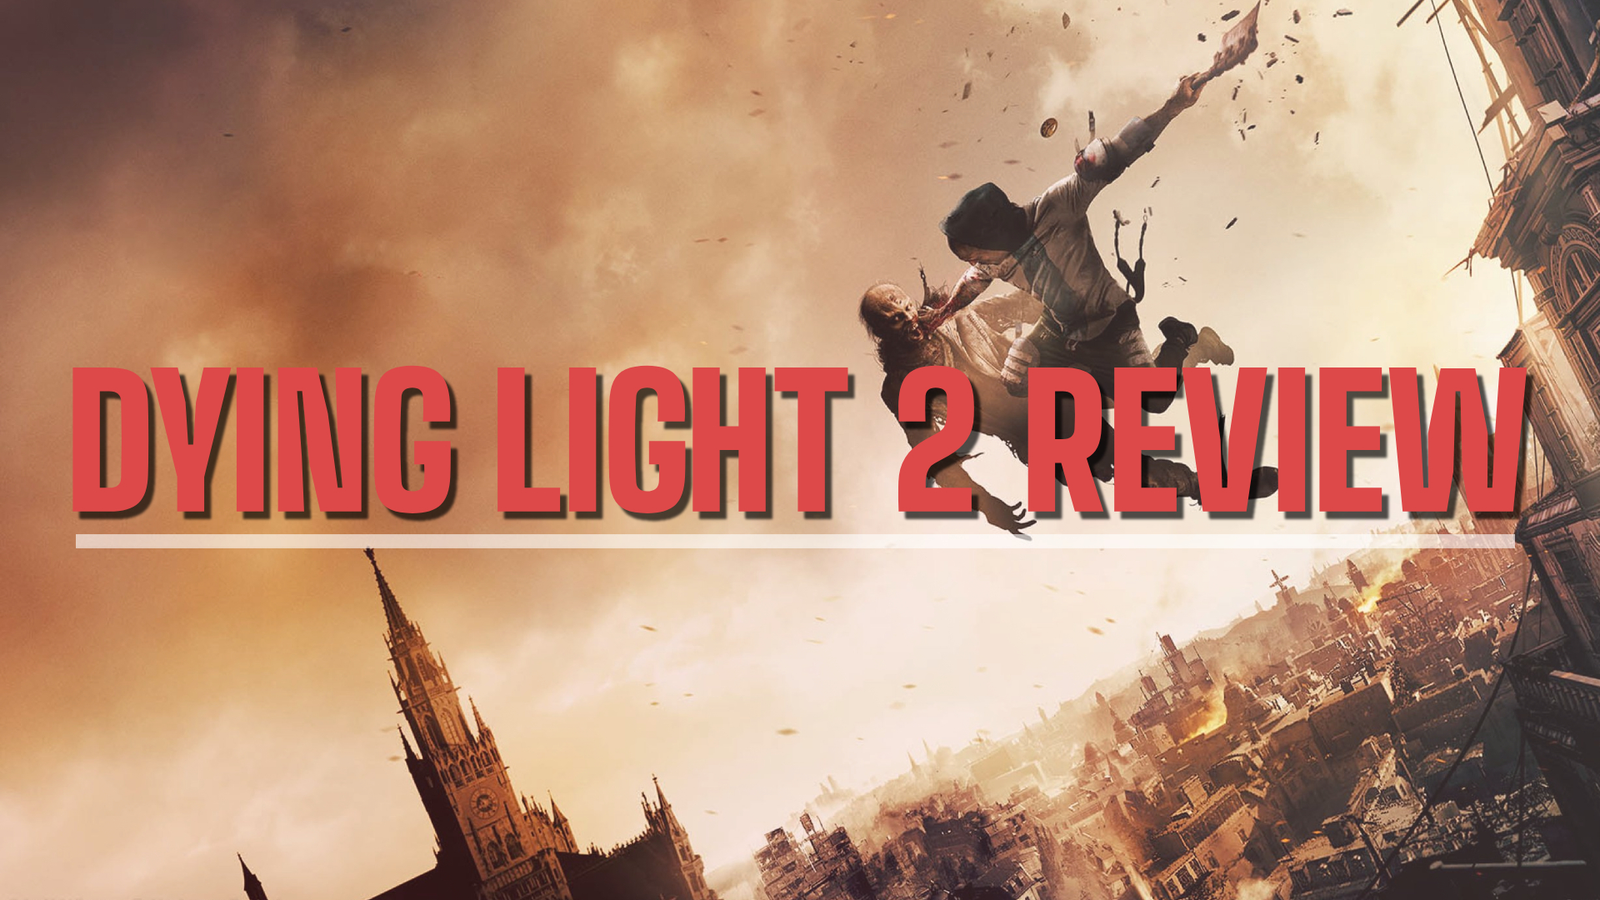 Dying Light 2 Metacritic Review Ratings - FOXNGAME